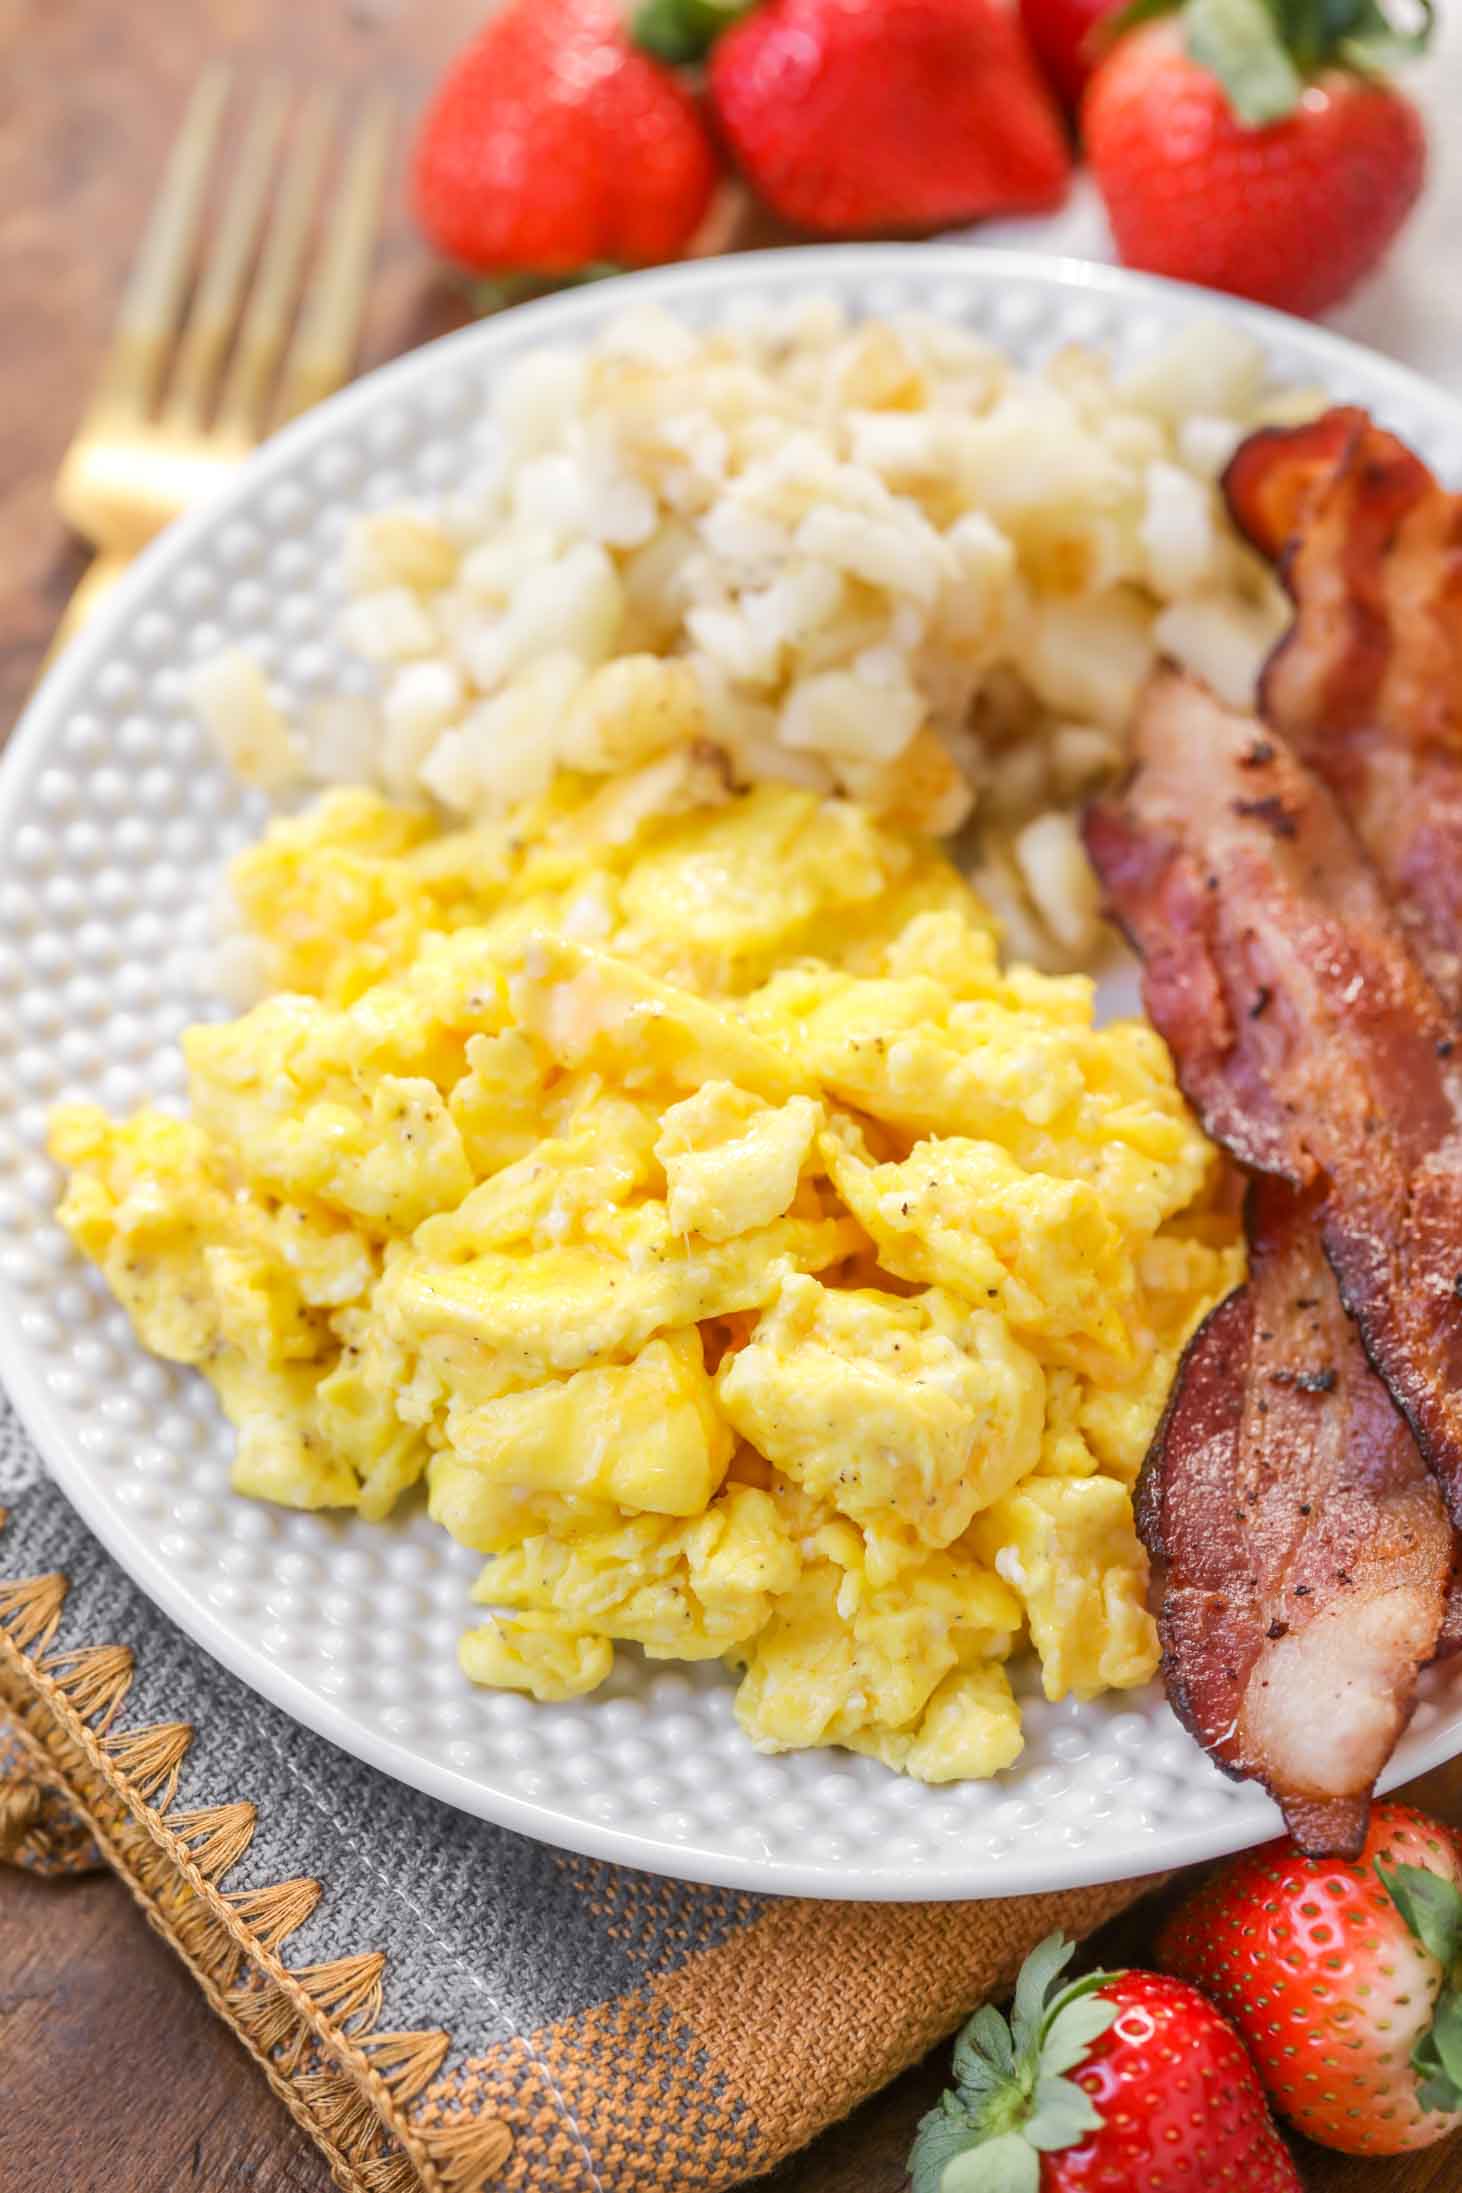 Scrambled eggs to serve with breakfast and gravy.